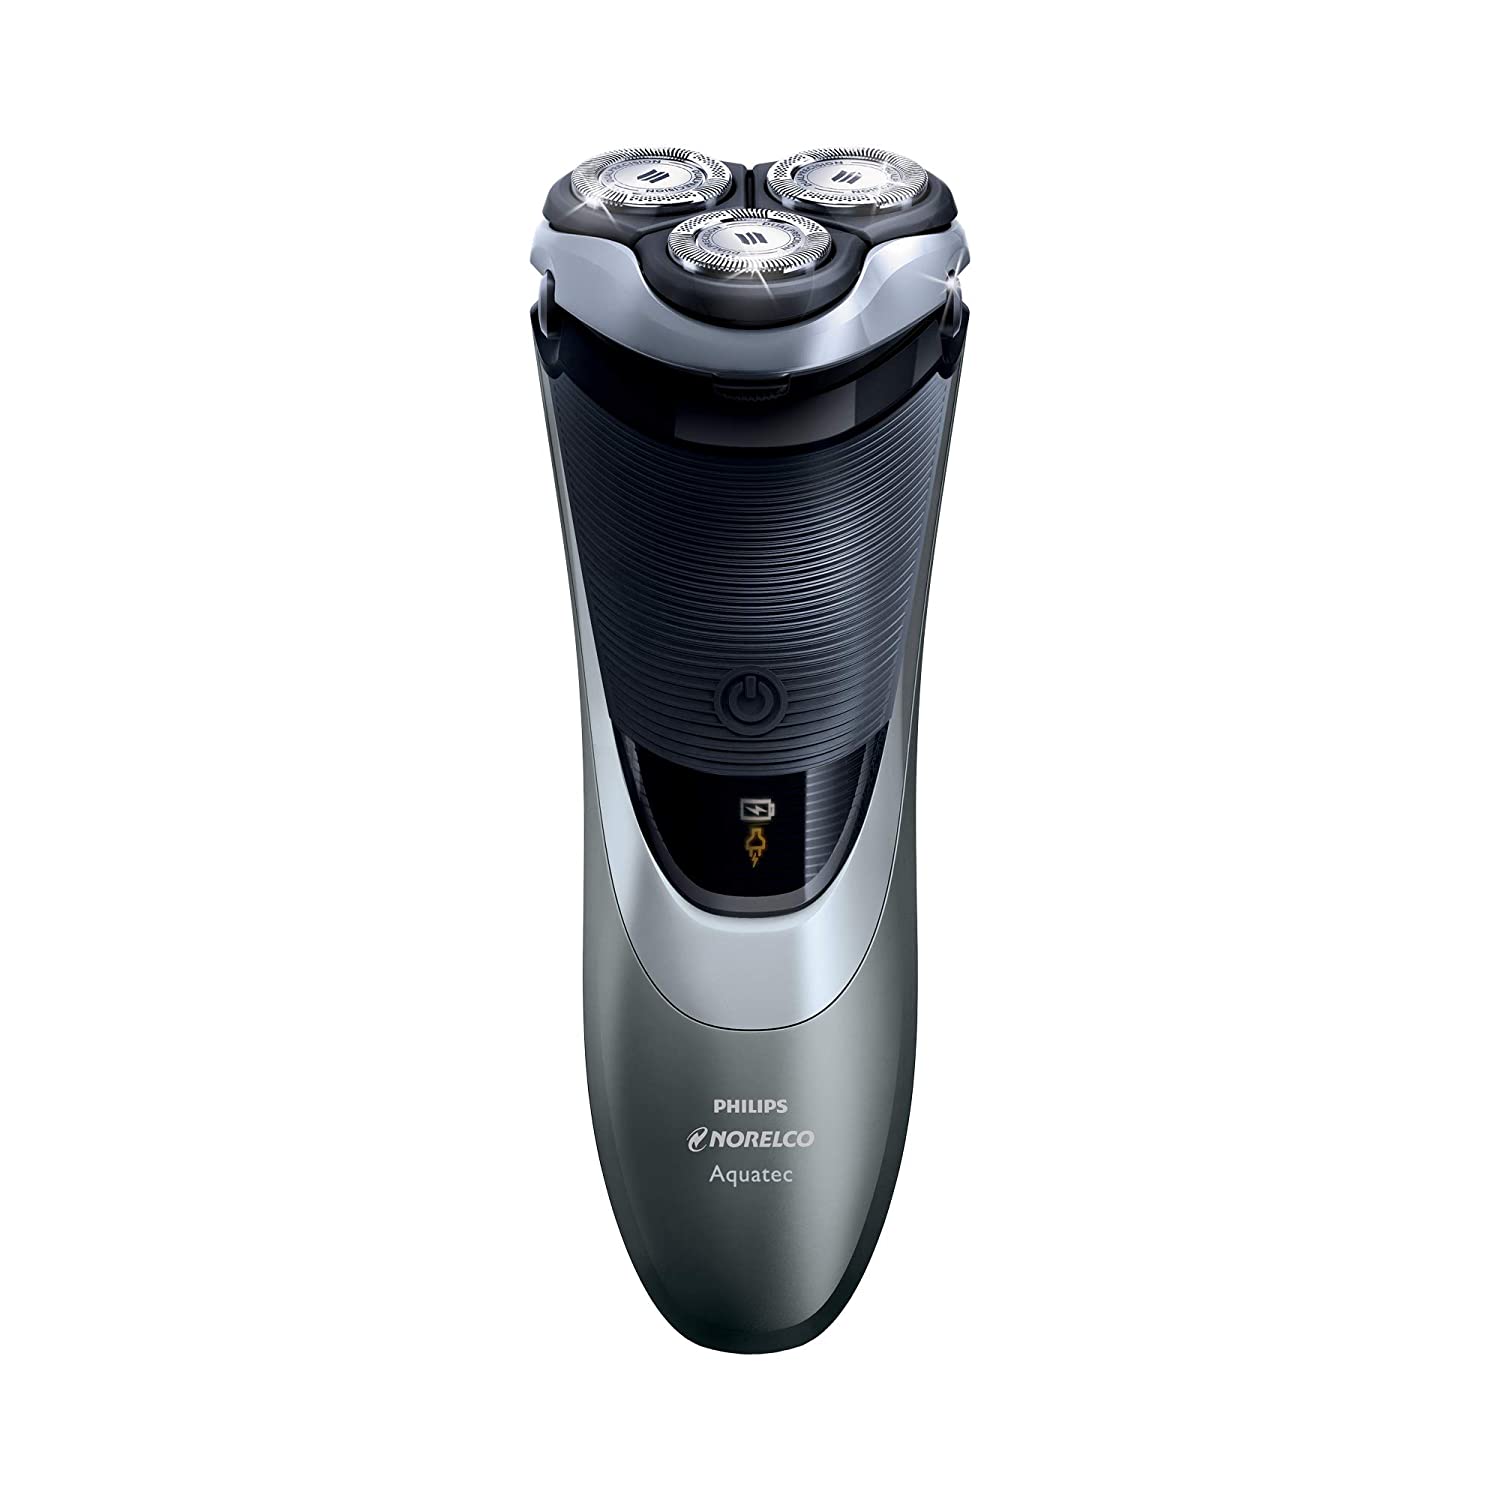 Philips Norelco  Shaver, 1 ea - image 2 of 6